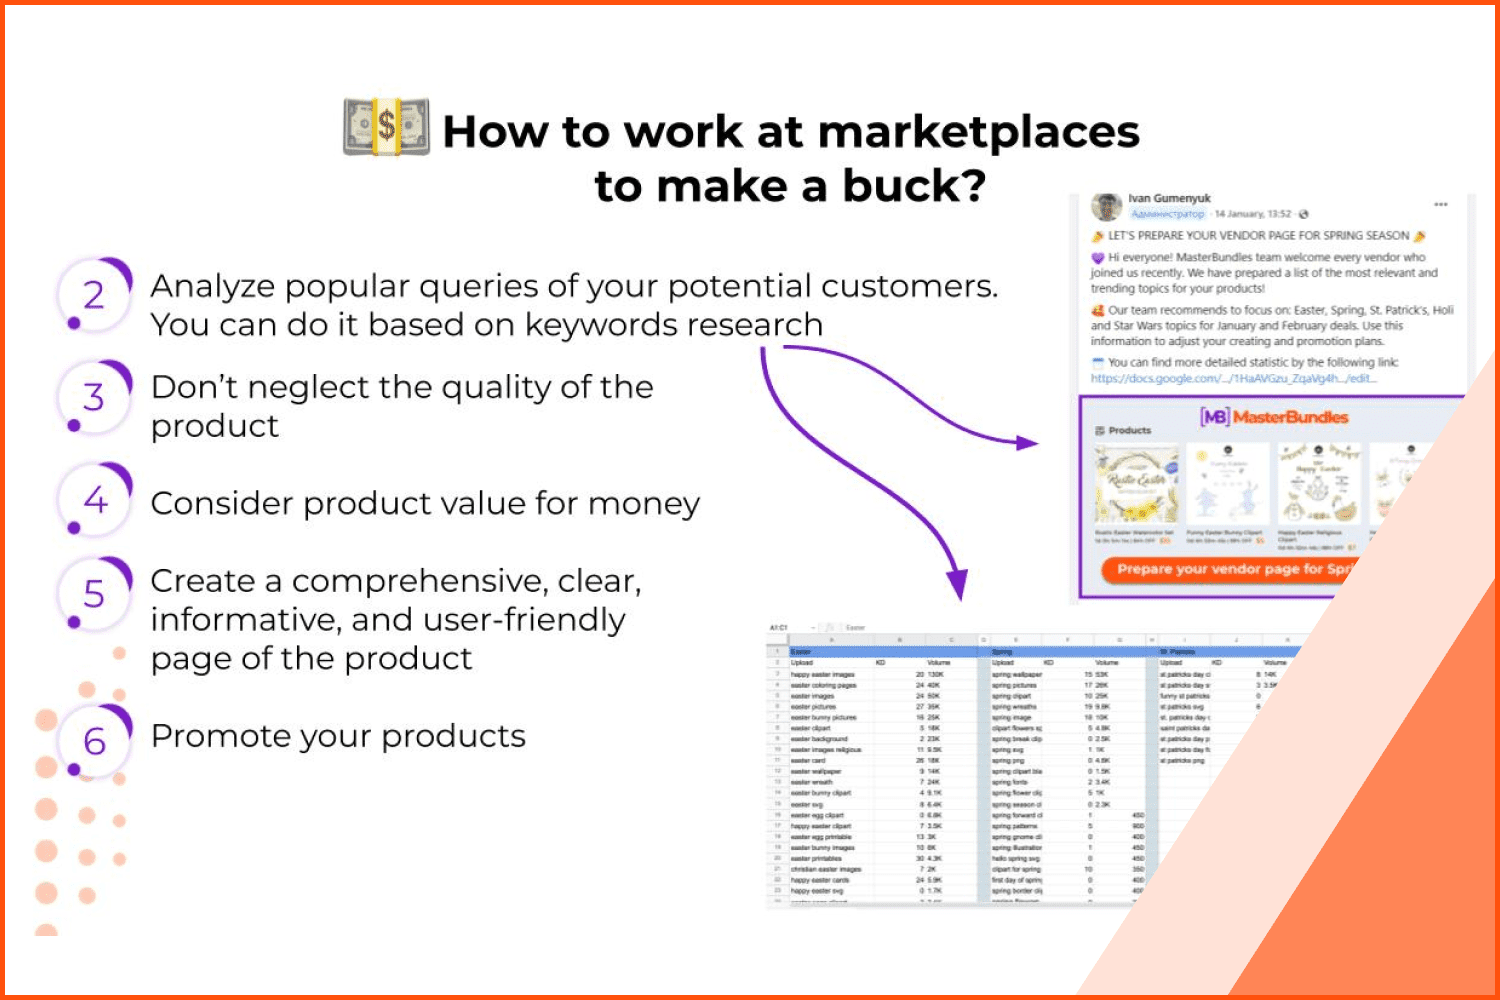 How to work at a marketplace in 2022 to make a buck.